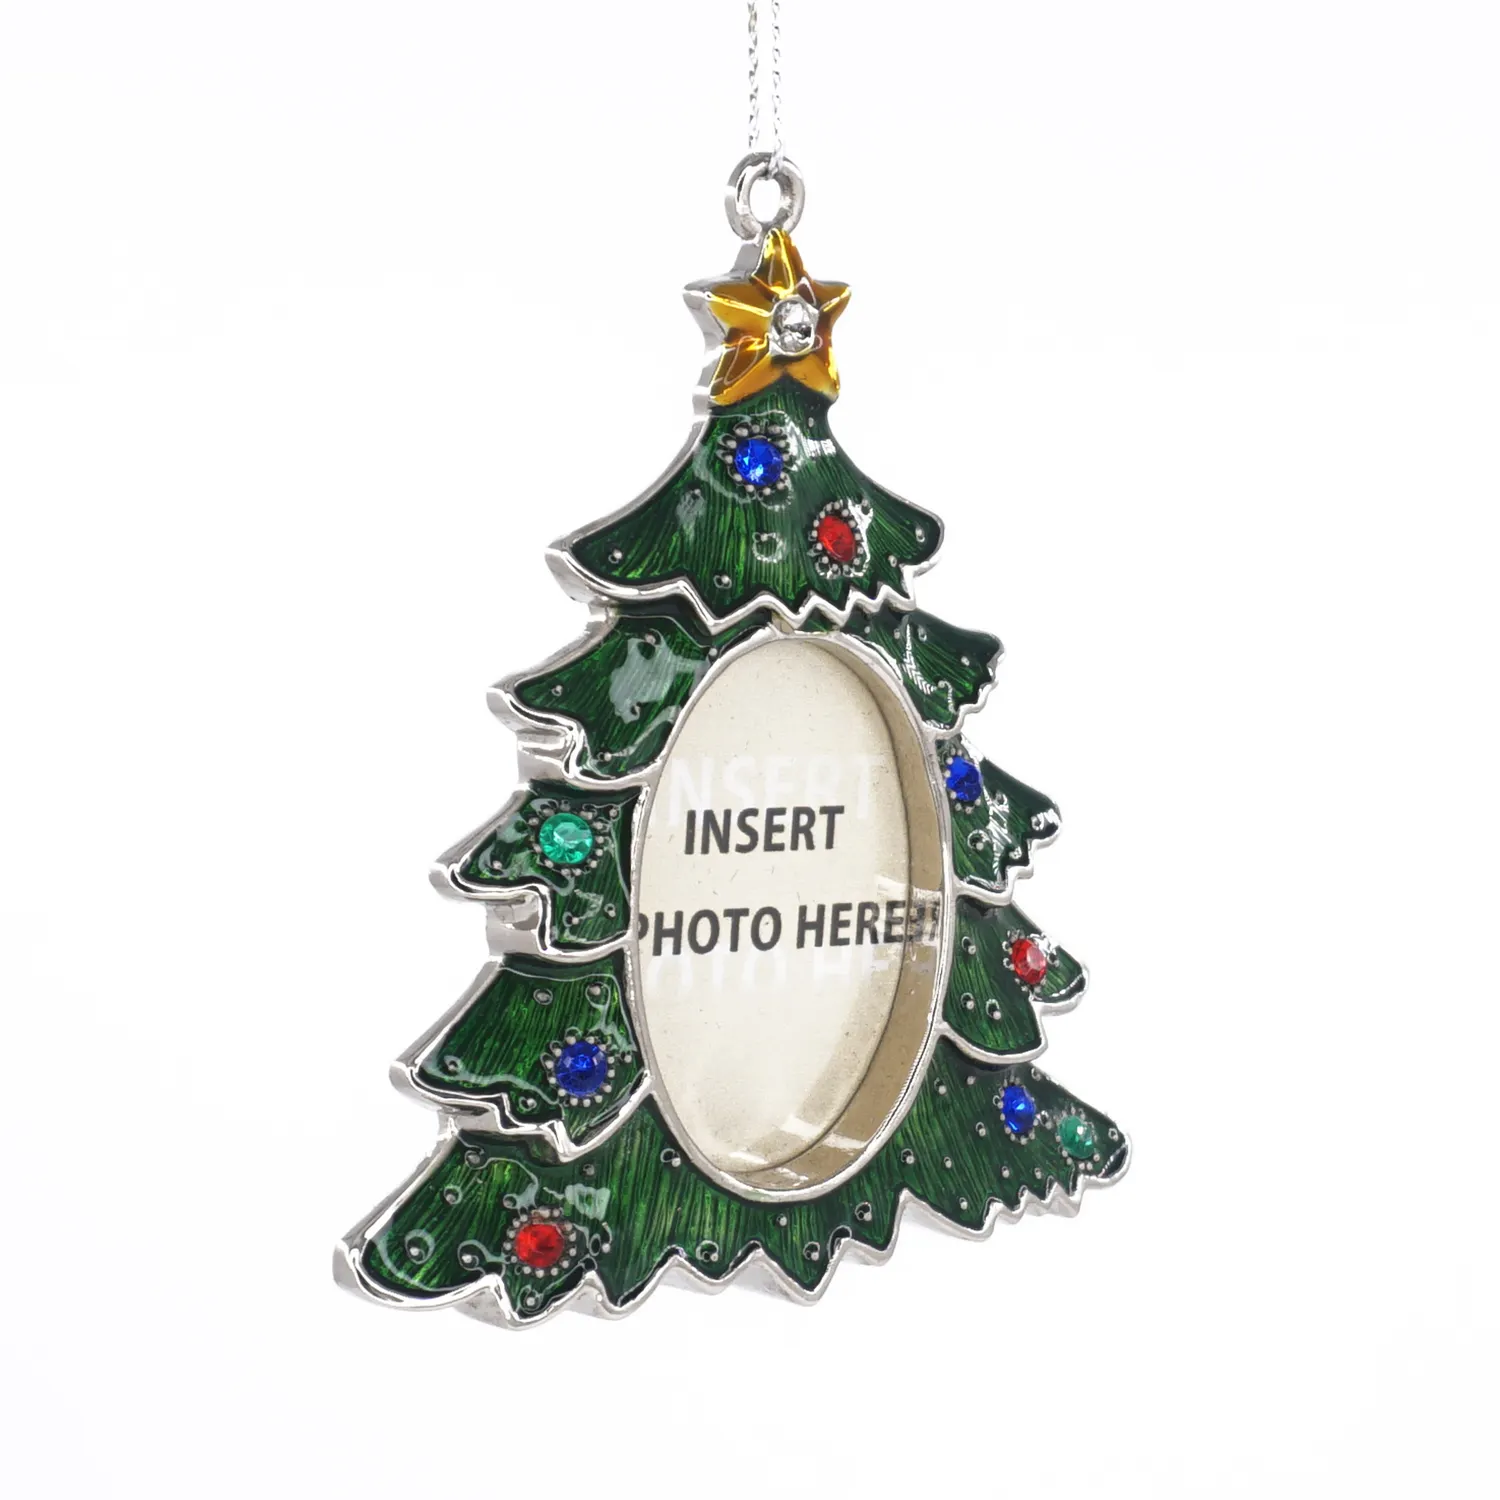 1.5x2 Inch Tree Shaped Photo Frame Christmas Tree Decor Picture Photo Ornament